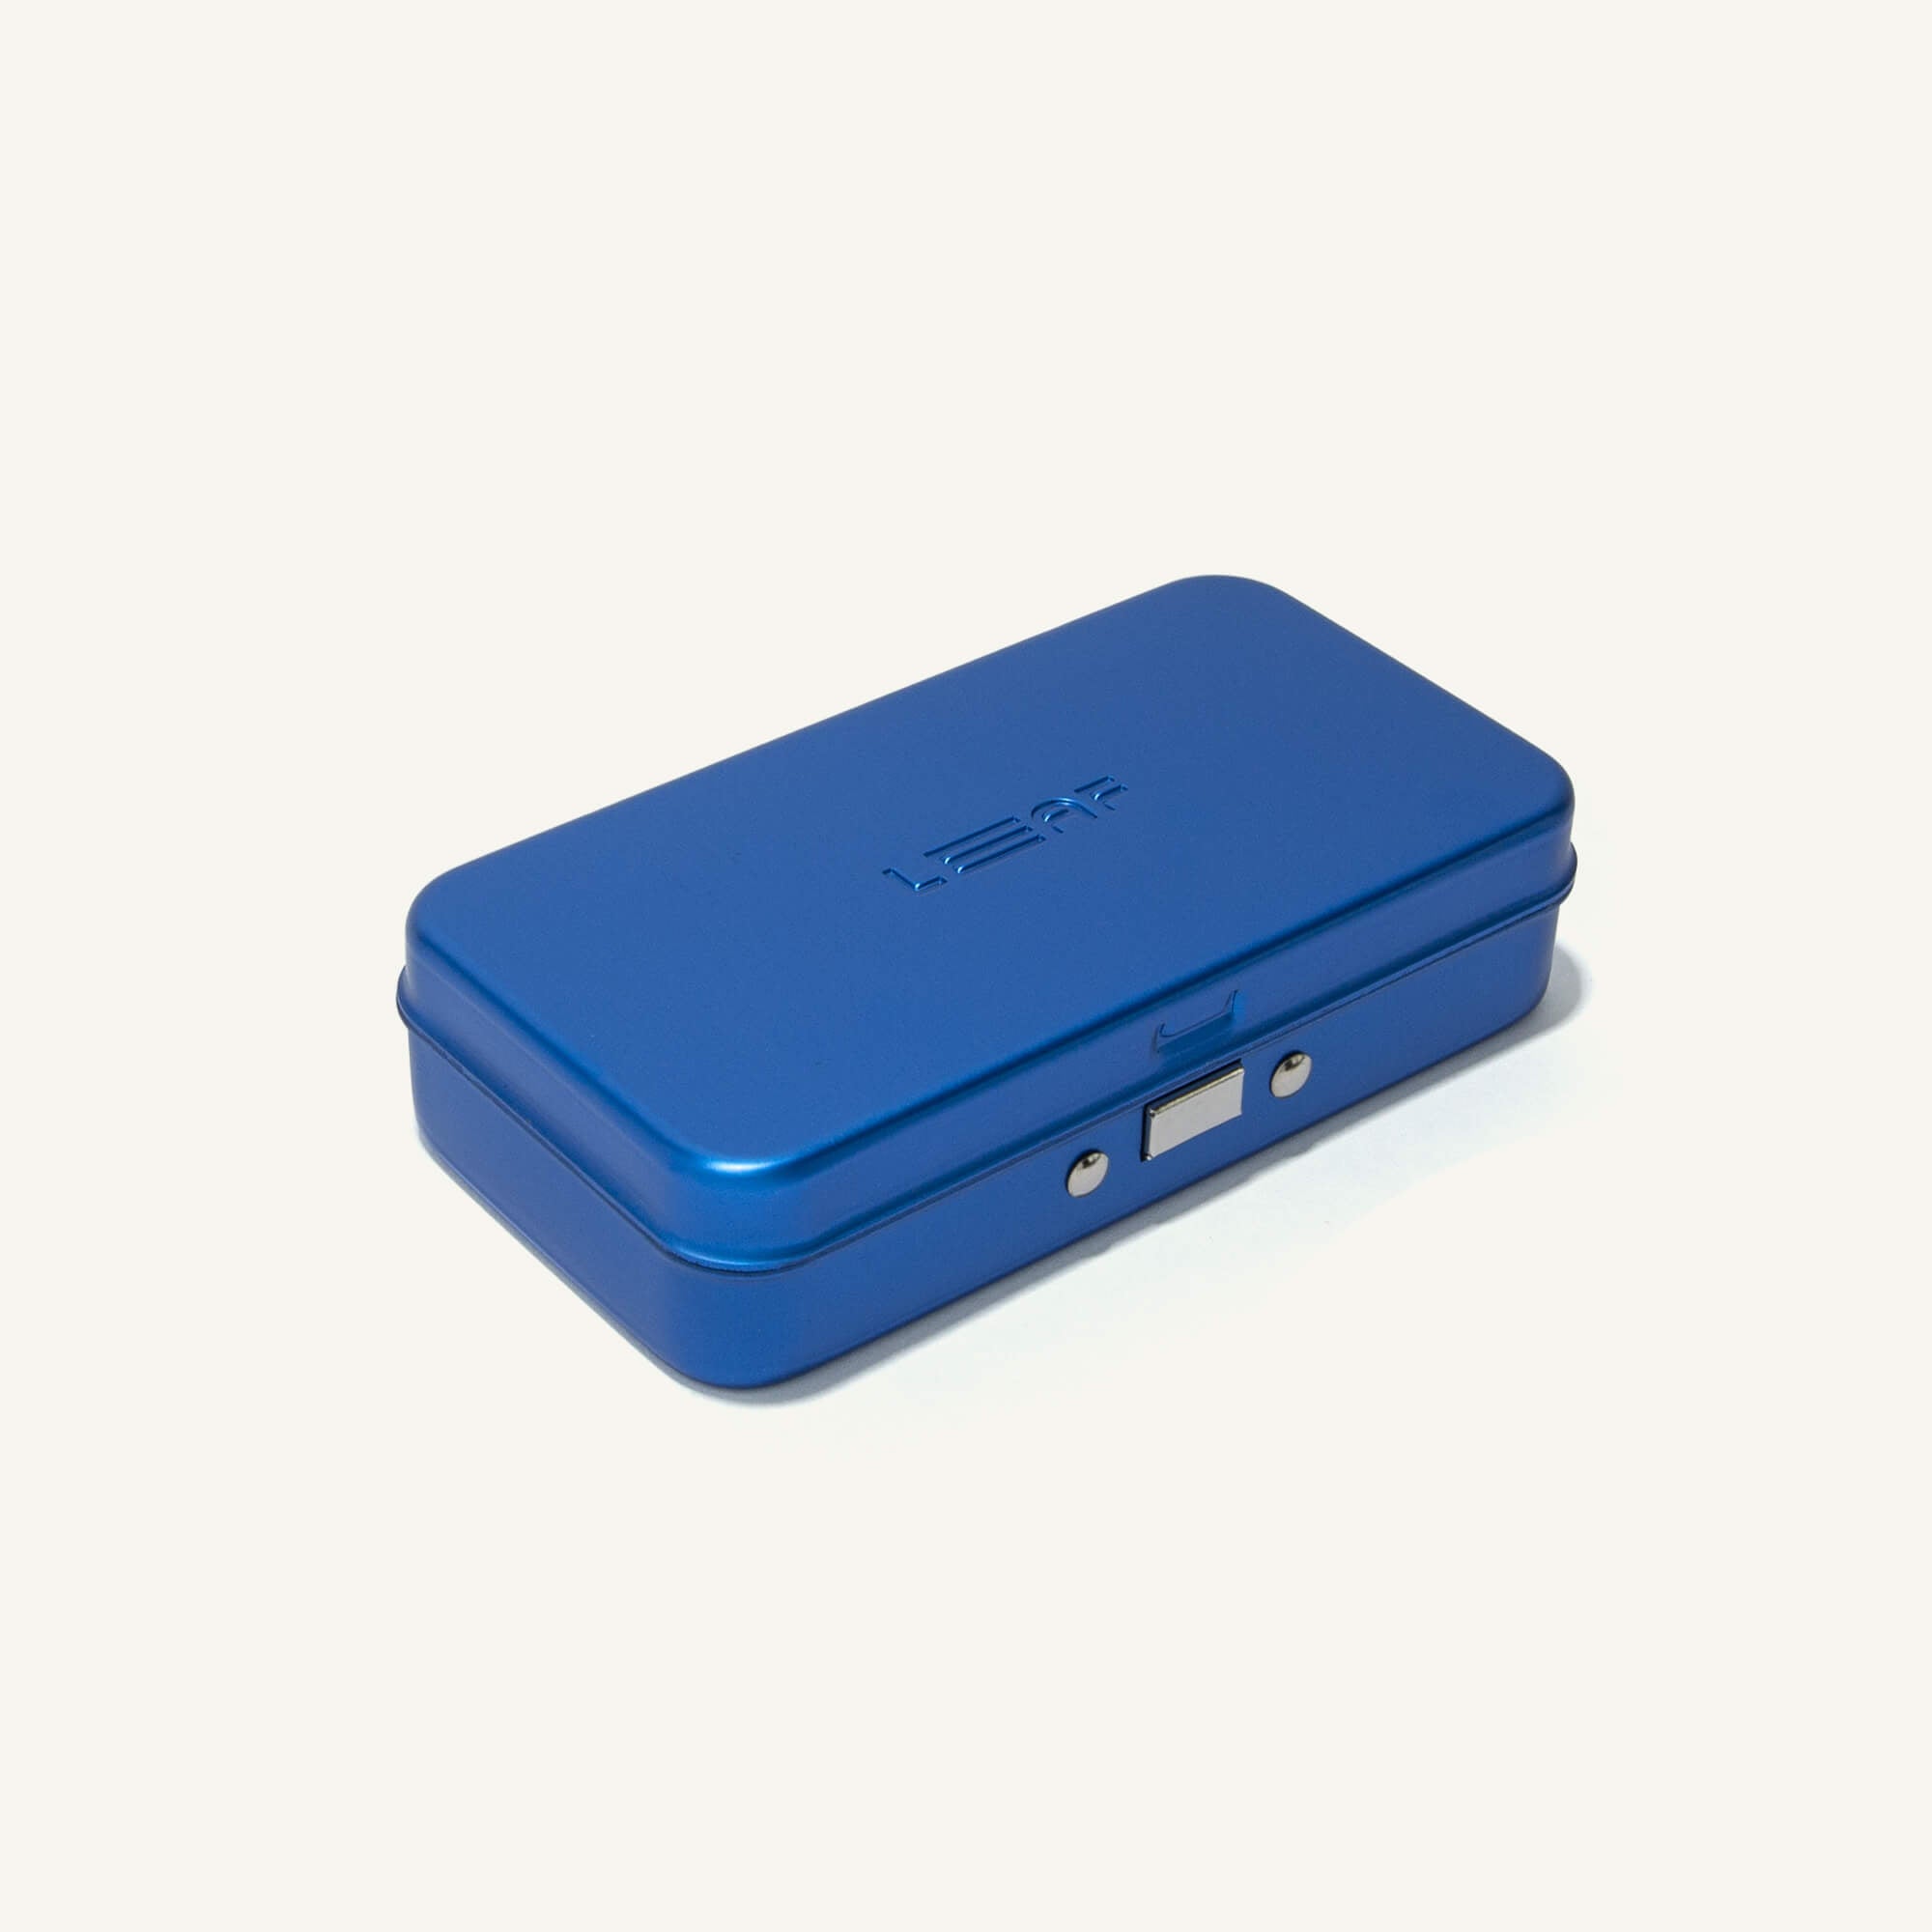 Blue case for the single-edge razors, closed, on a white background.